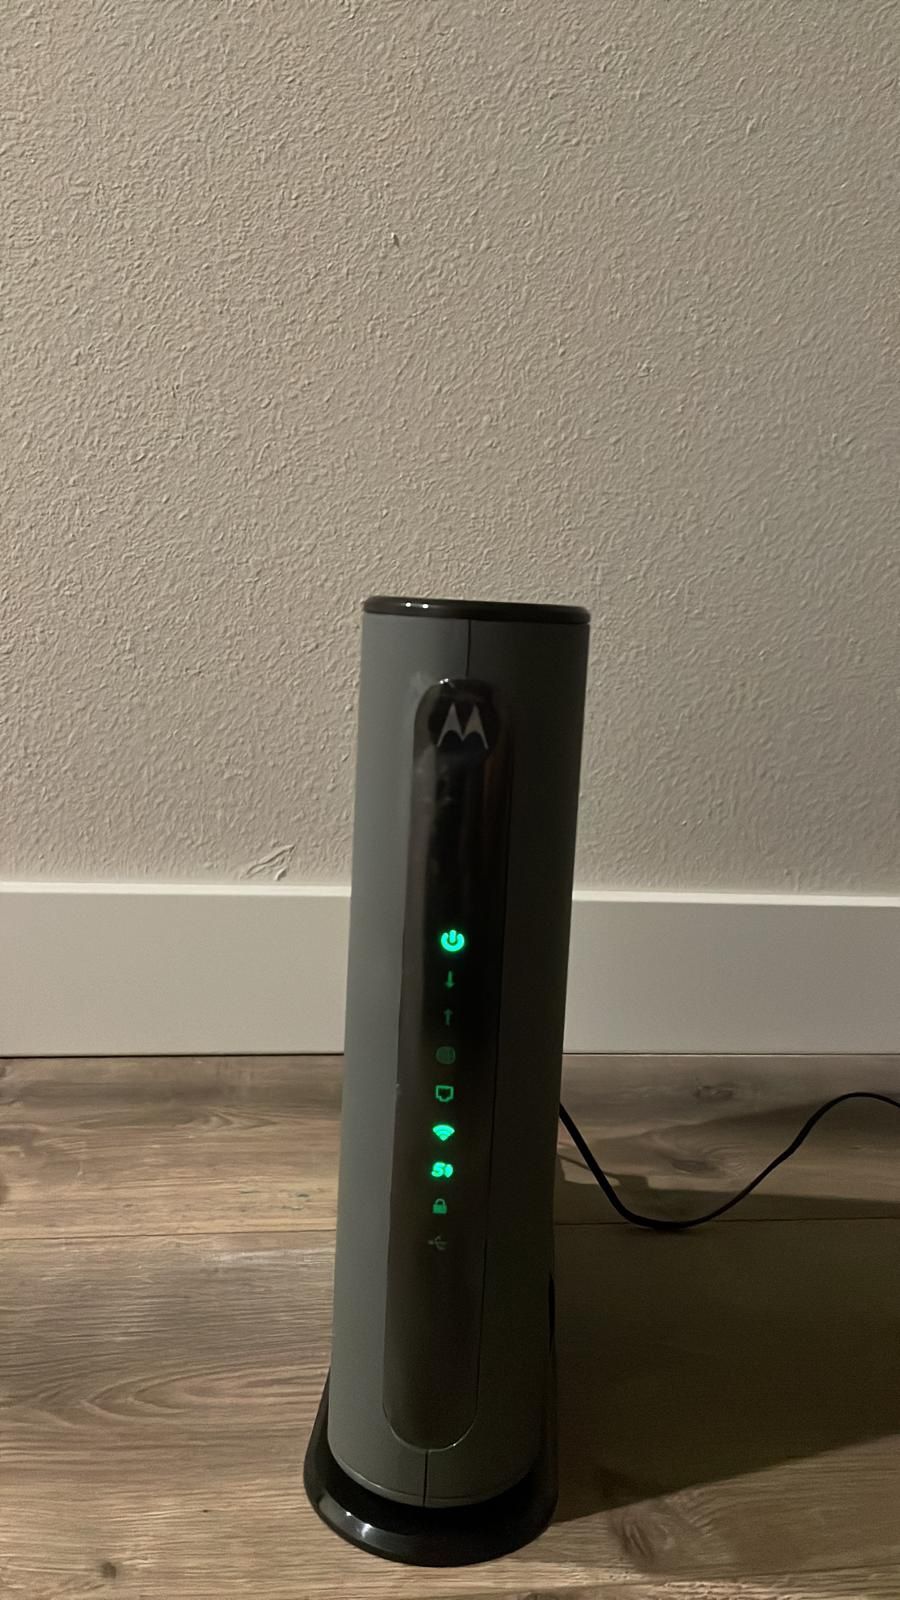 Motorola Docsis 3.1 Modem and Router 